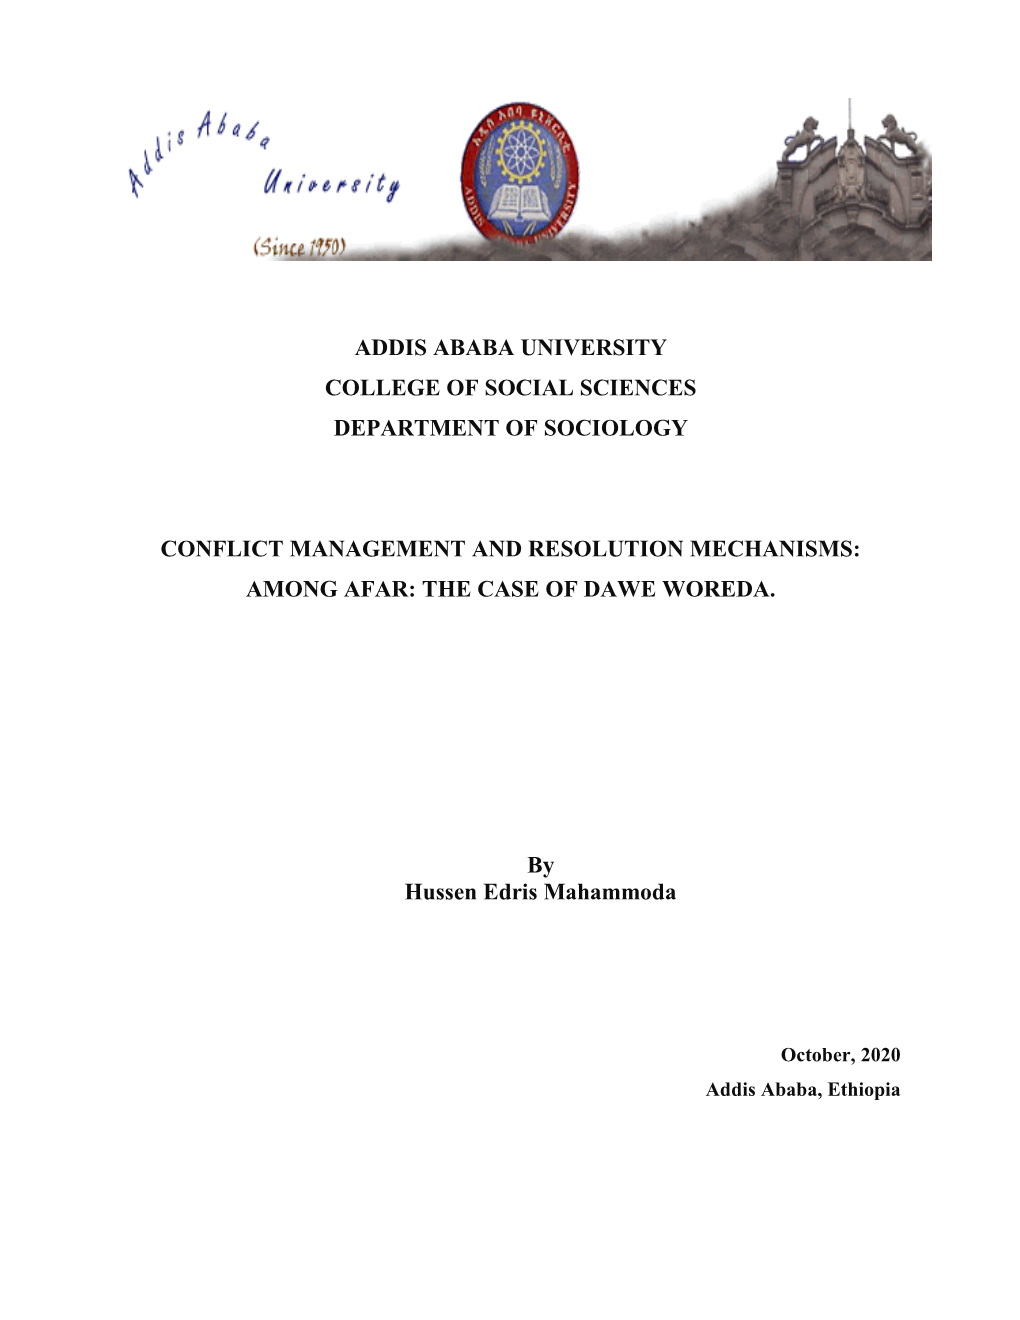 Addis Ababa University College of Social Sciences Department of Sociology Conflict Management and Resolution Mechanisms: Among A